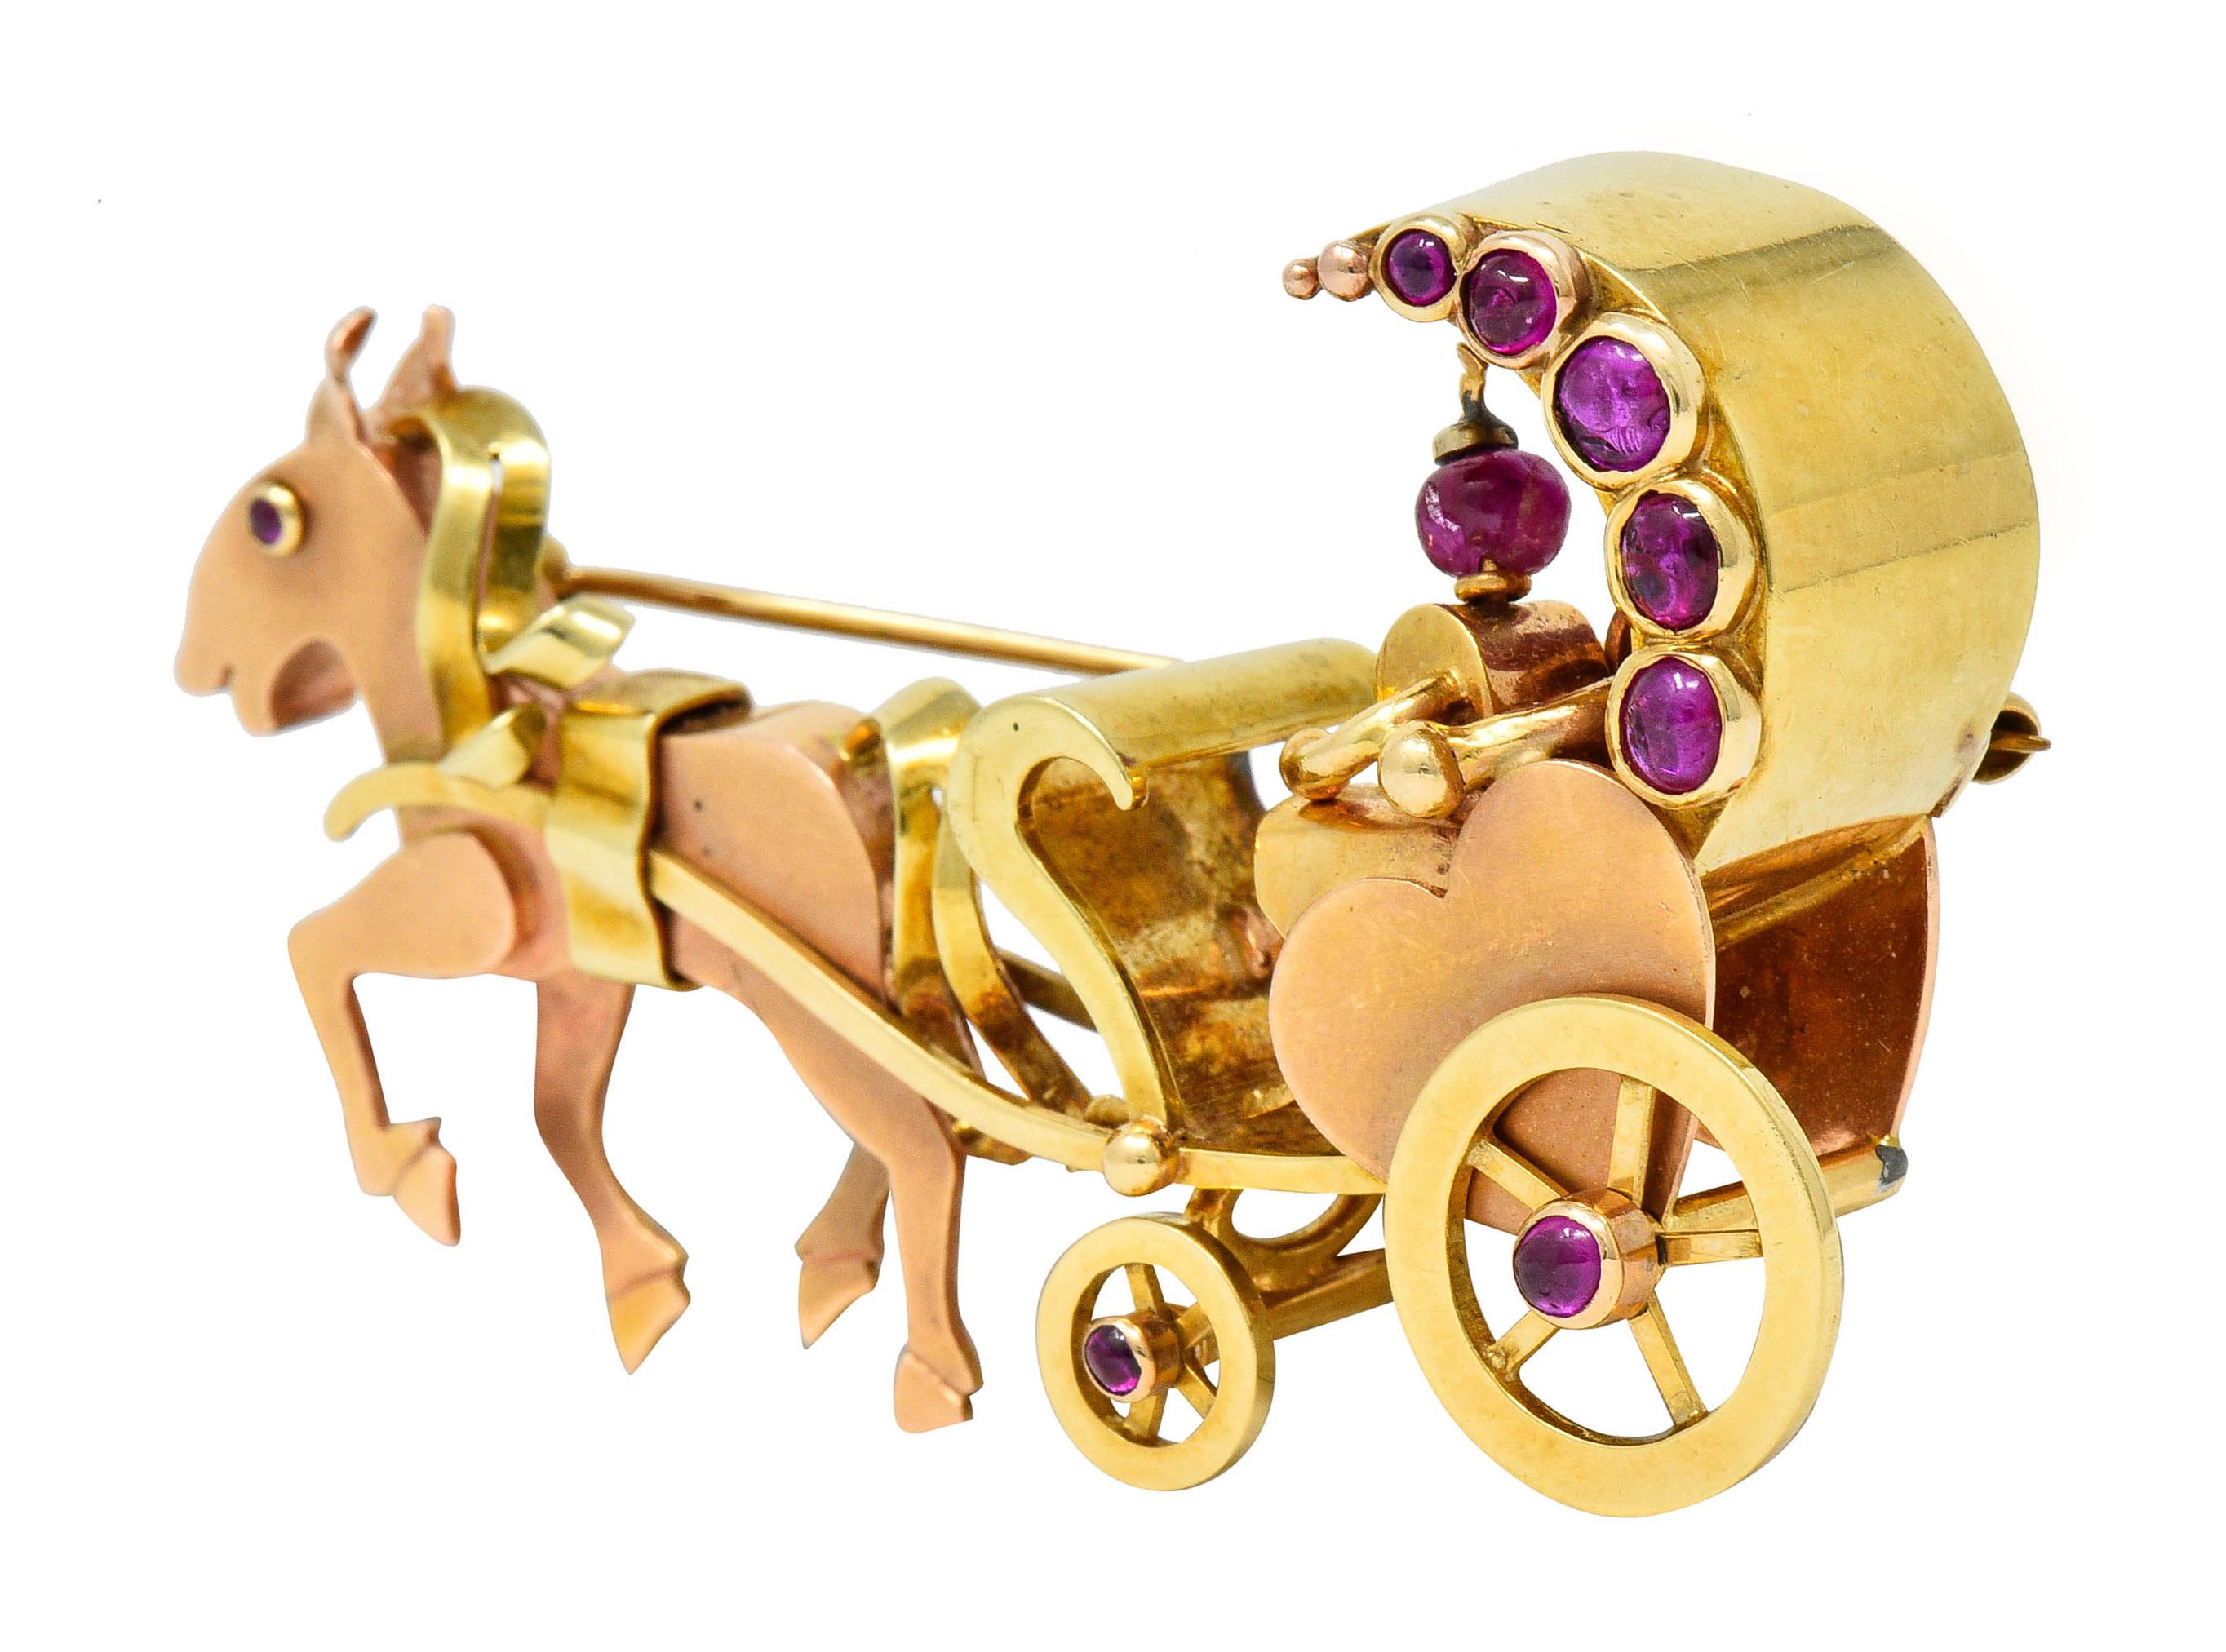 Brooch is designed as a jaunty rose gold horse pulling a heart shaped rose gold carriage with two figures inside

Mane, articulated wheels, carriage cover, and reigns are all polished yellow gold with stylized fabrication

Accented throughout by